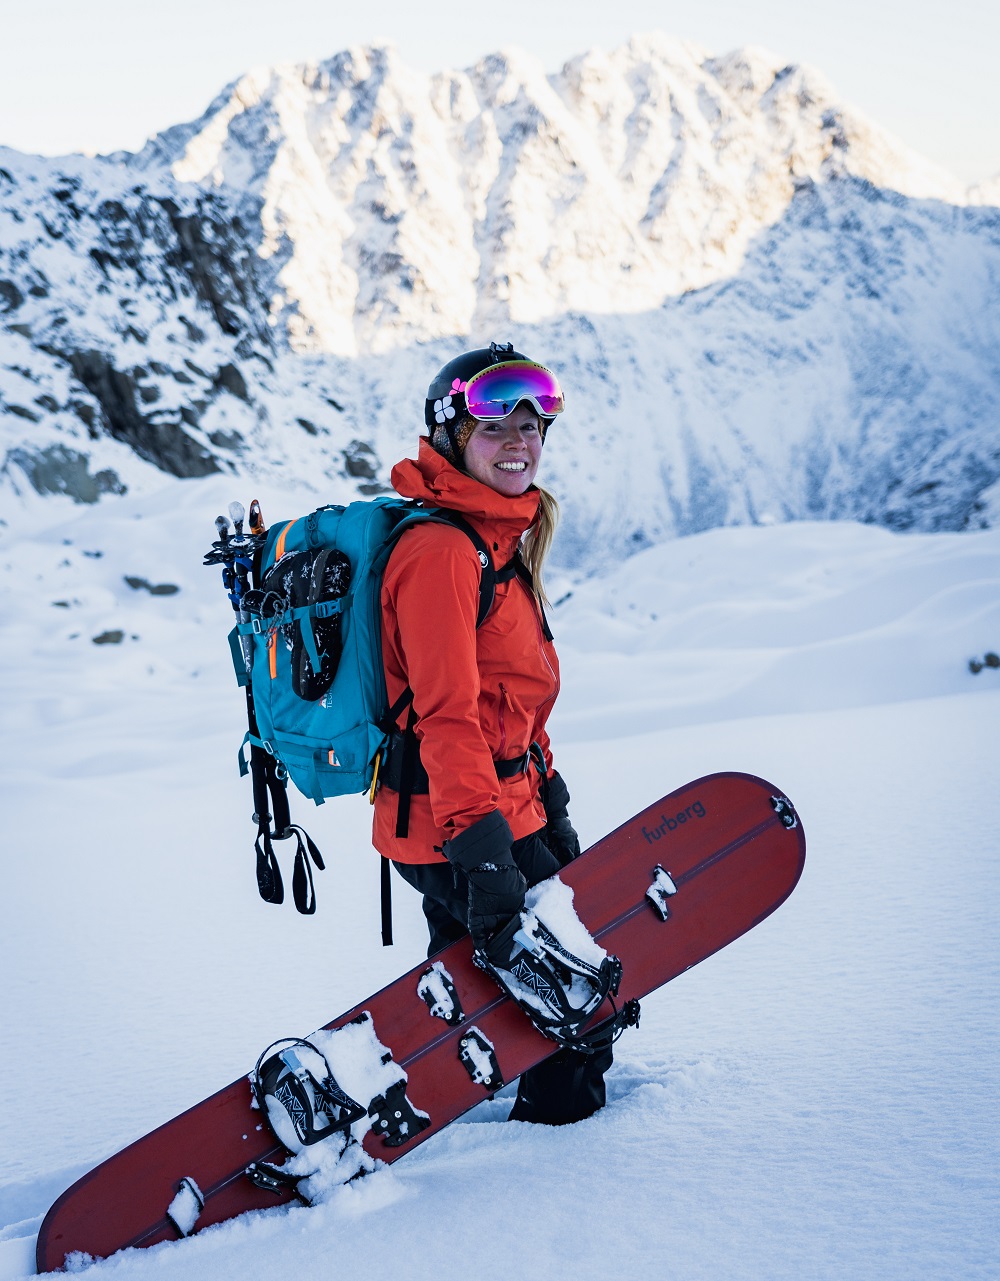 "Unlike the Alps, there are no big approaches in Norway. 20 minutes from my door I can reach a couloir and climb up to an alpine peak." Photo: Sigurd Salberg Pedersen